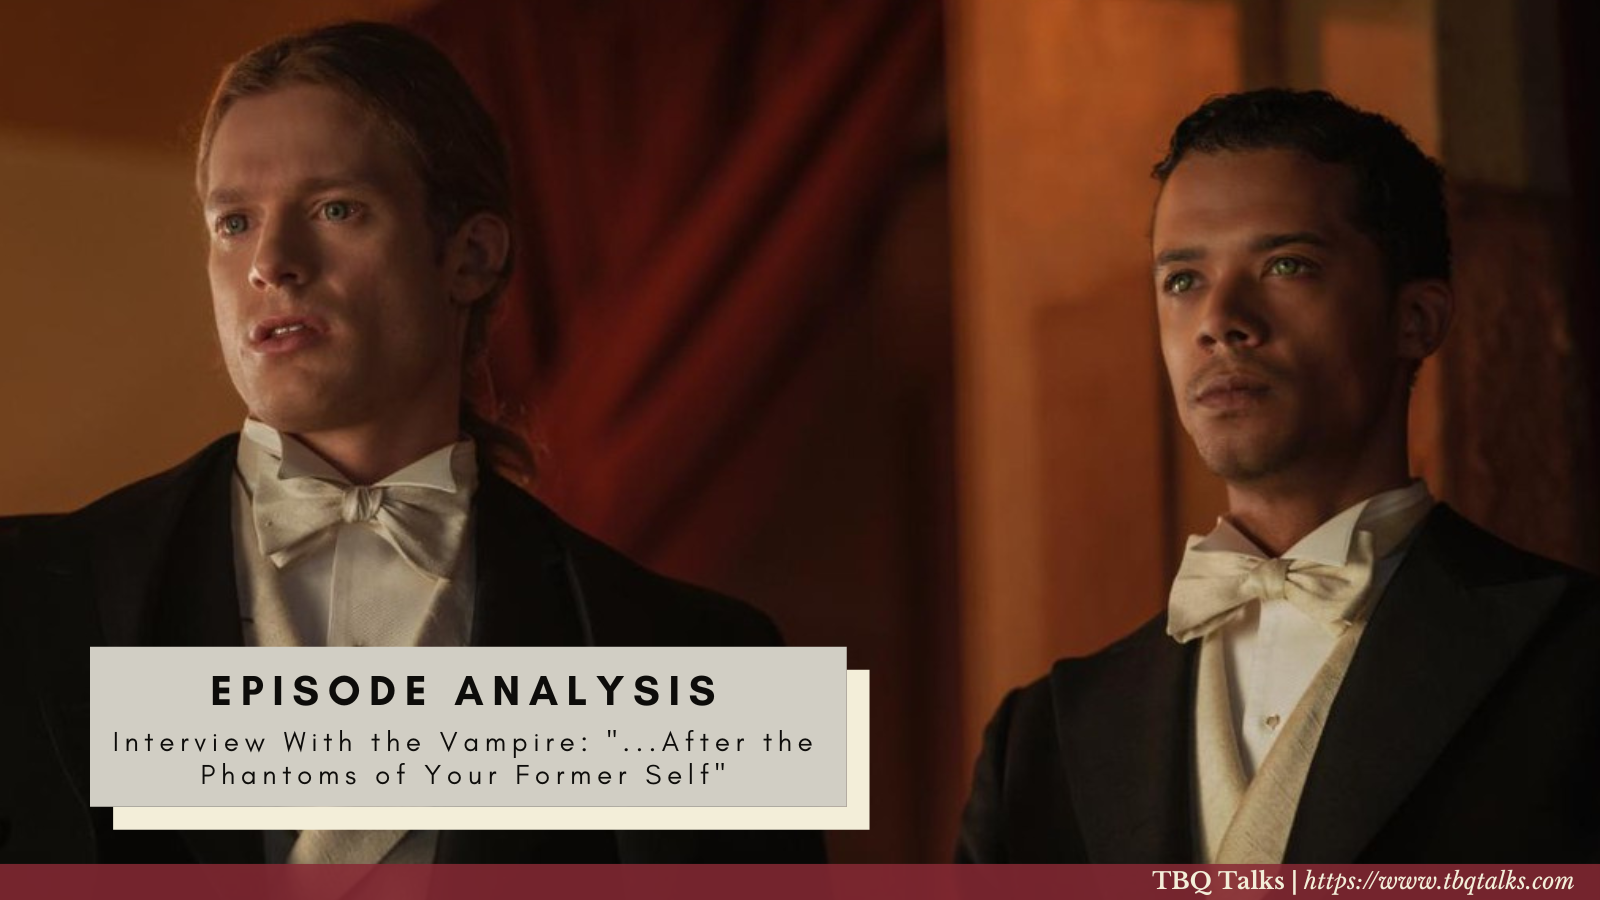 Episode Analysis Interview With the Vampire: "...After the Phantoms of Your Former Self"